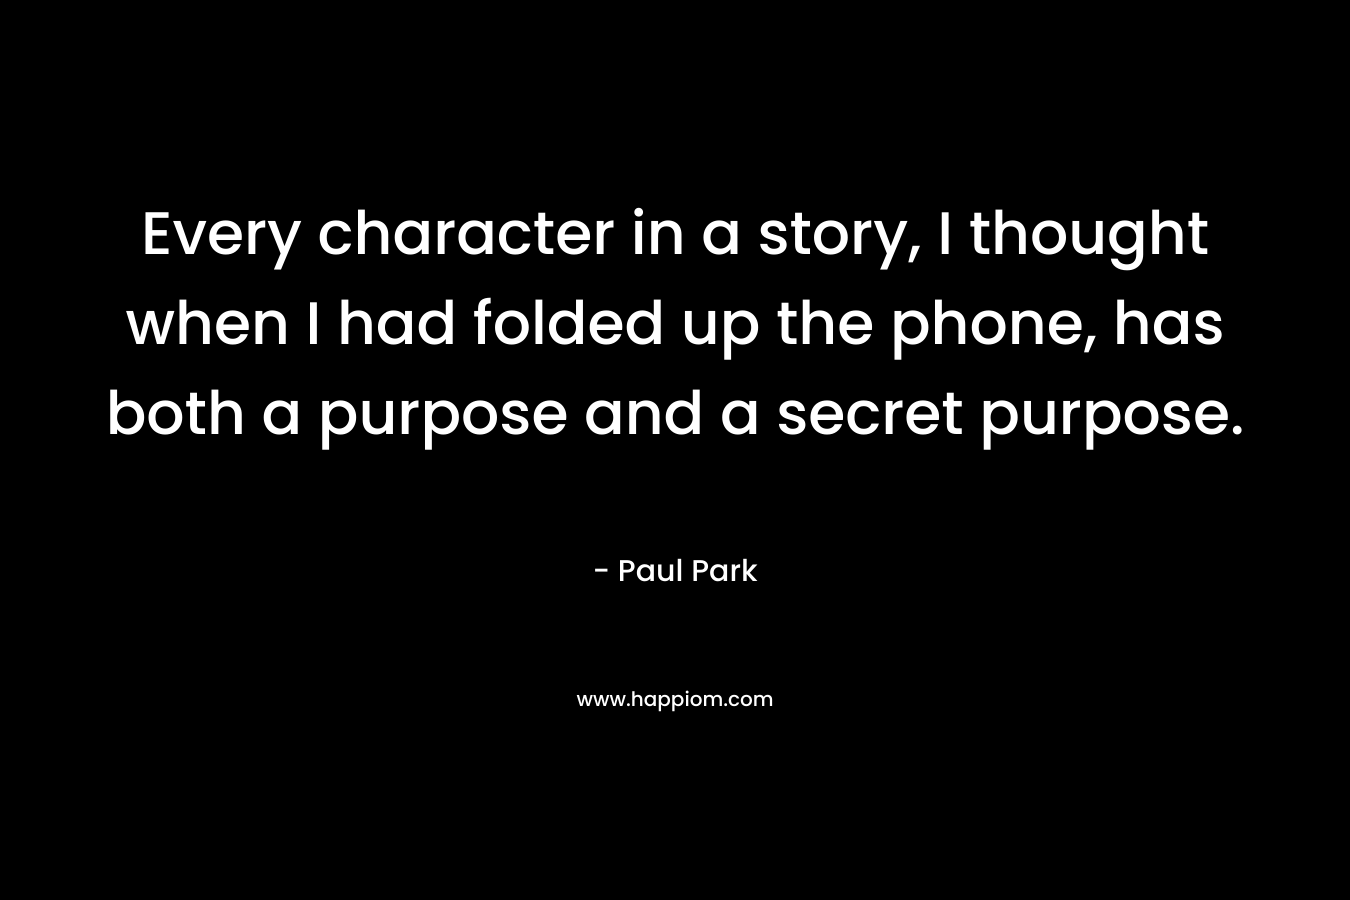 Every character in a story, I thought when I had folded up the phone, has both a purpose and a secret purpose.